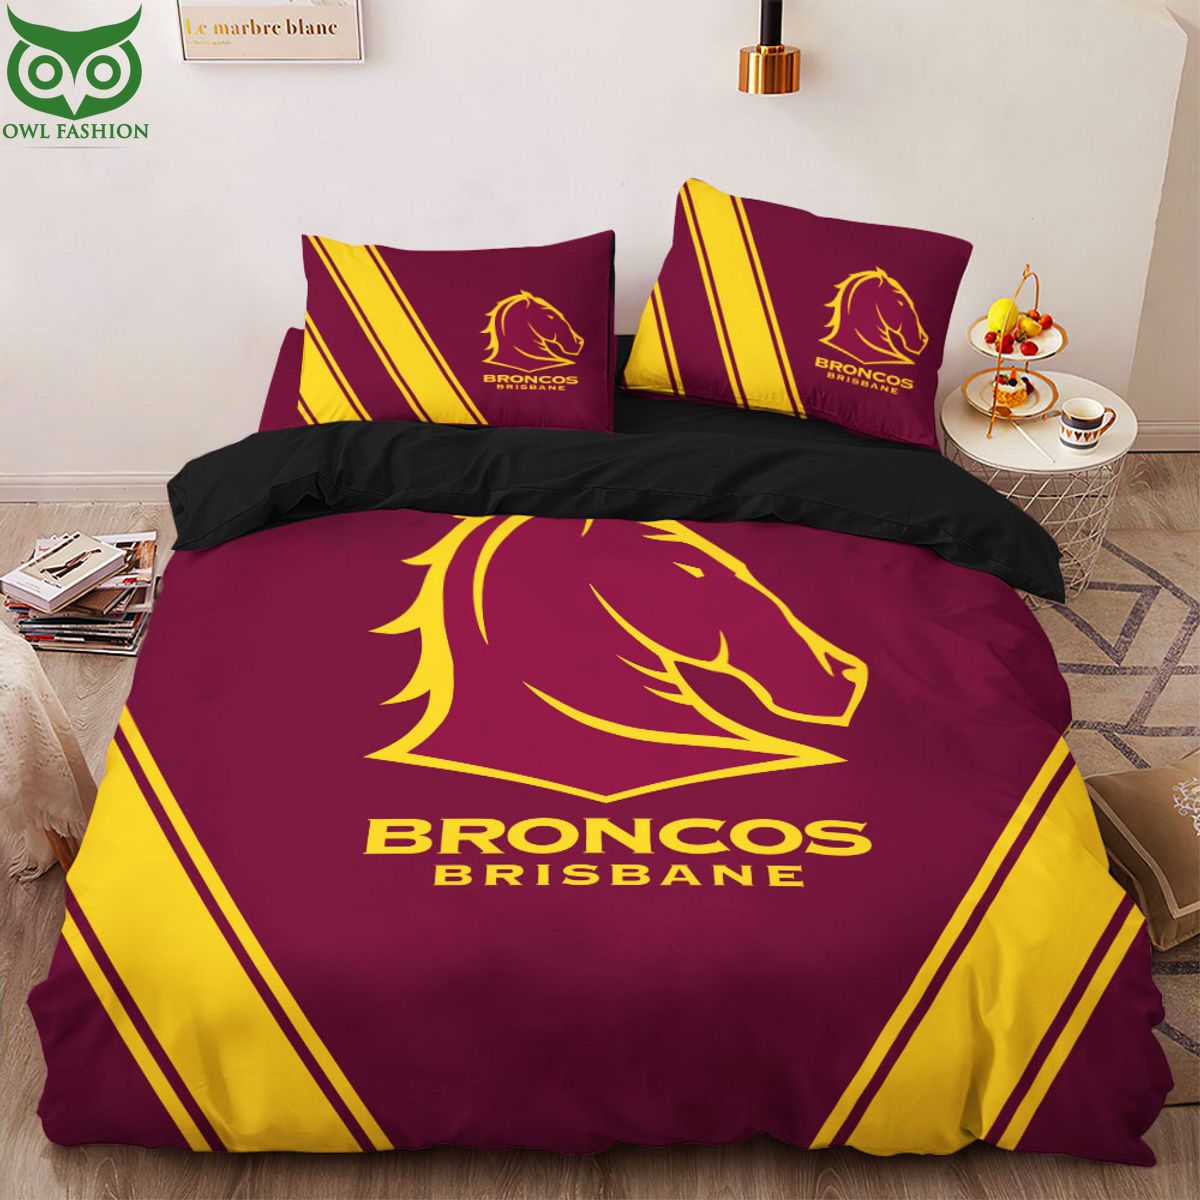 Brisbane Broncos Limited Bedding set Your face is glowing like a red rose